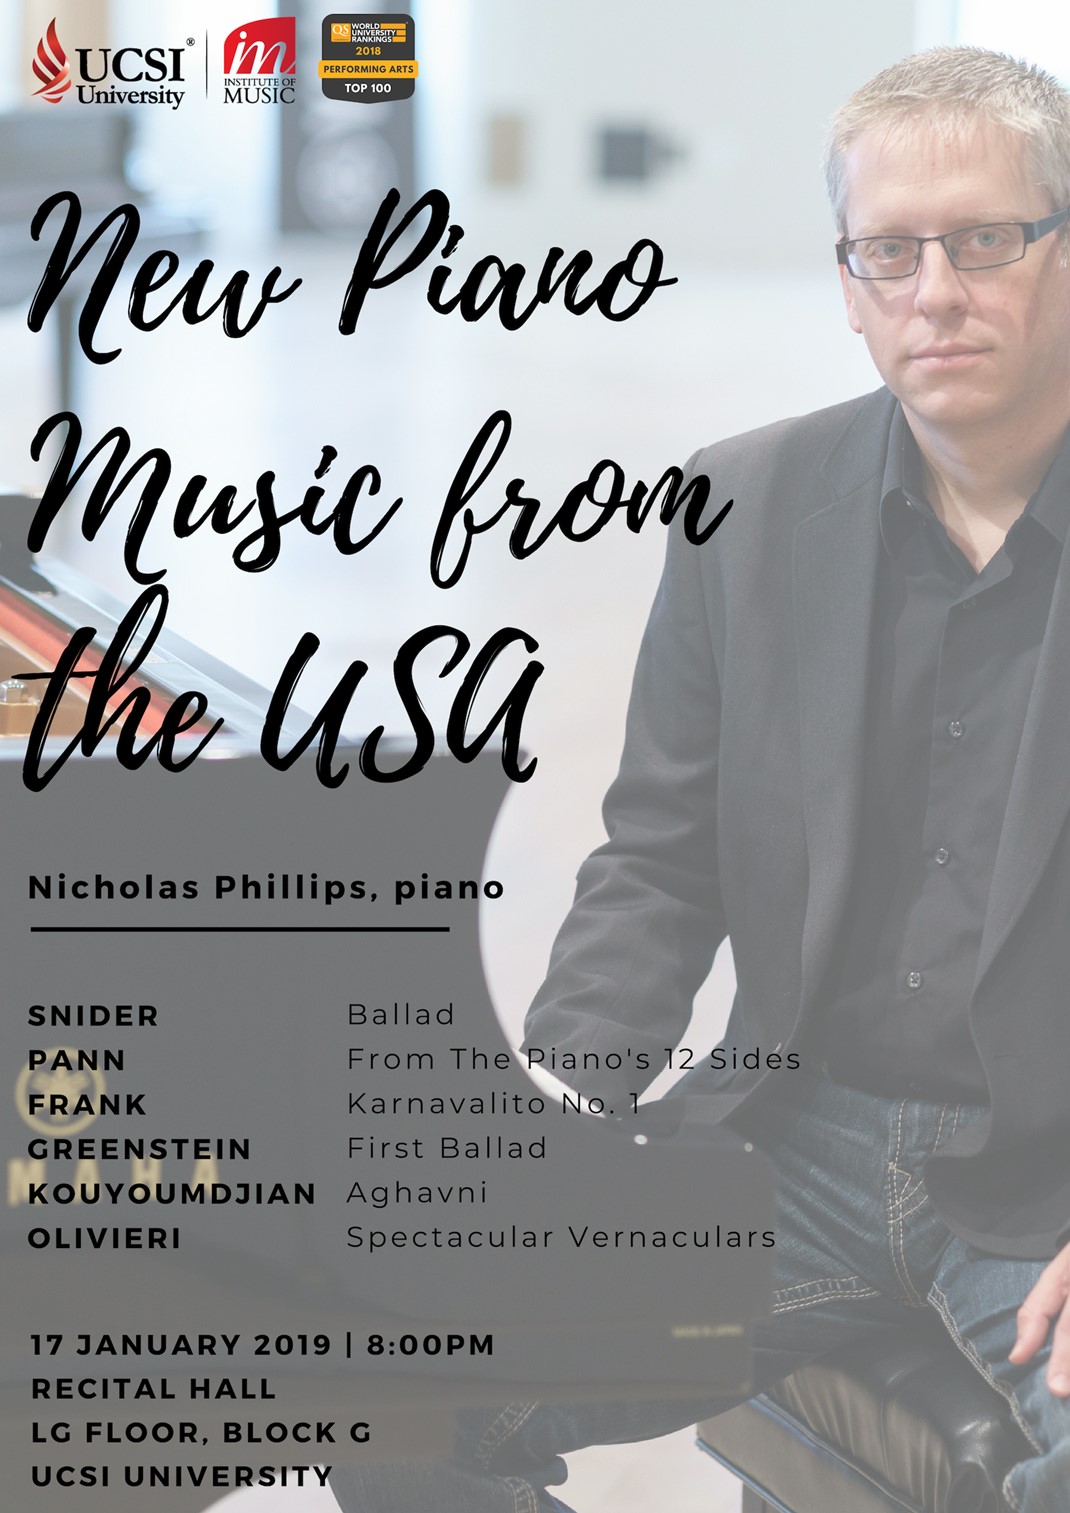 NEW PIANO MUSIC FROM THE USA